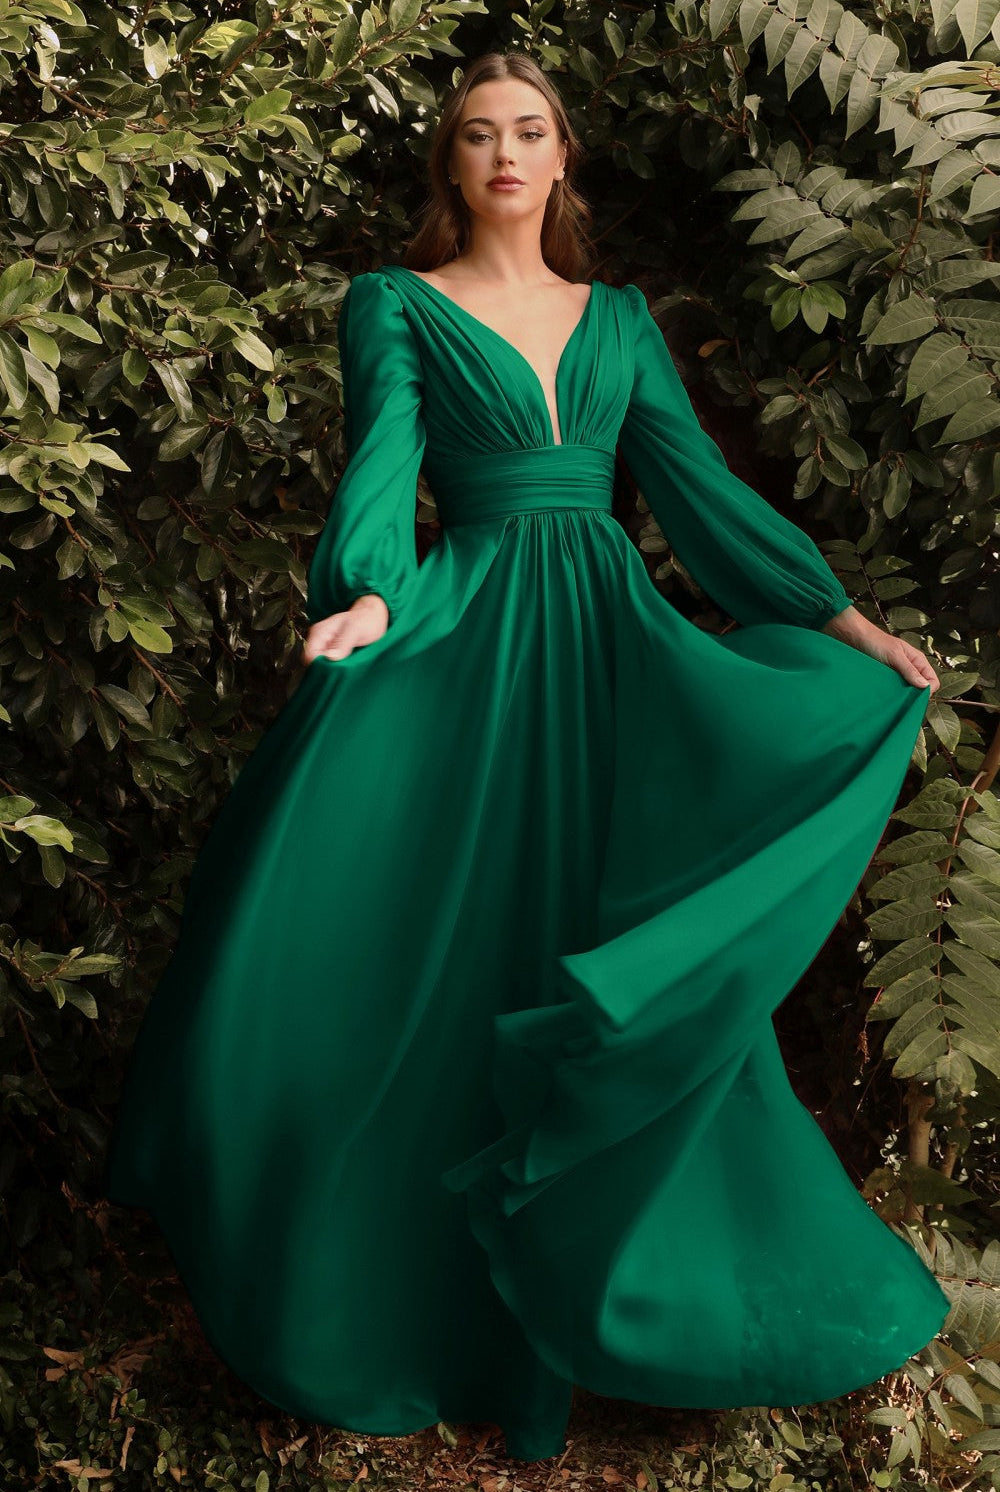 Long Sleeve Chiffon Prom & Ball Dress Modest Gown Gathered Fitted Bodice Sensual Open Back A-line Silhouette CDCD0192 Sale-Prom Dress-smcfashion.com